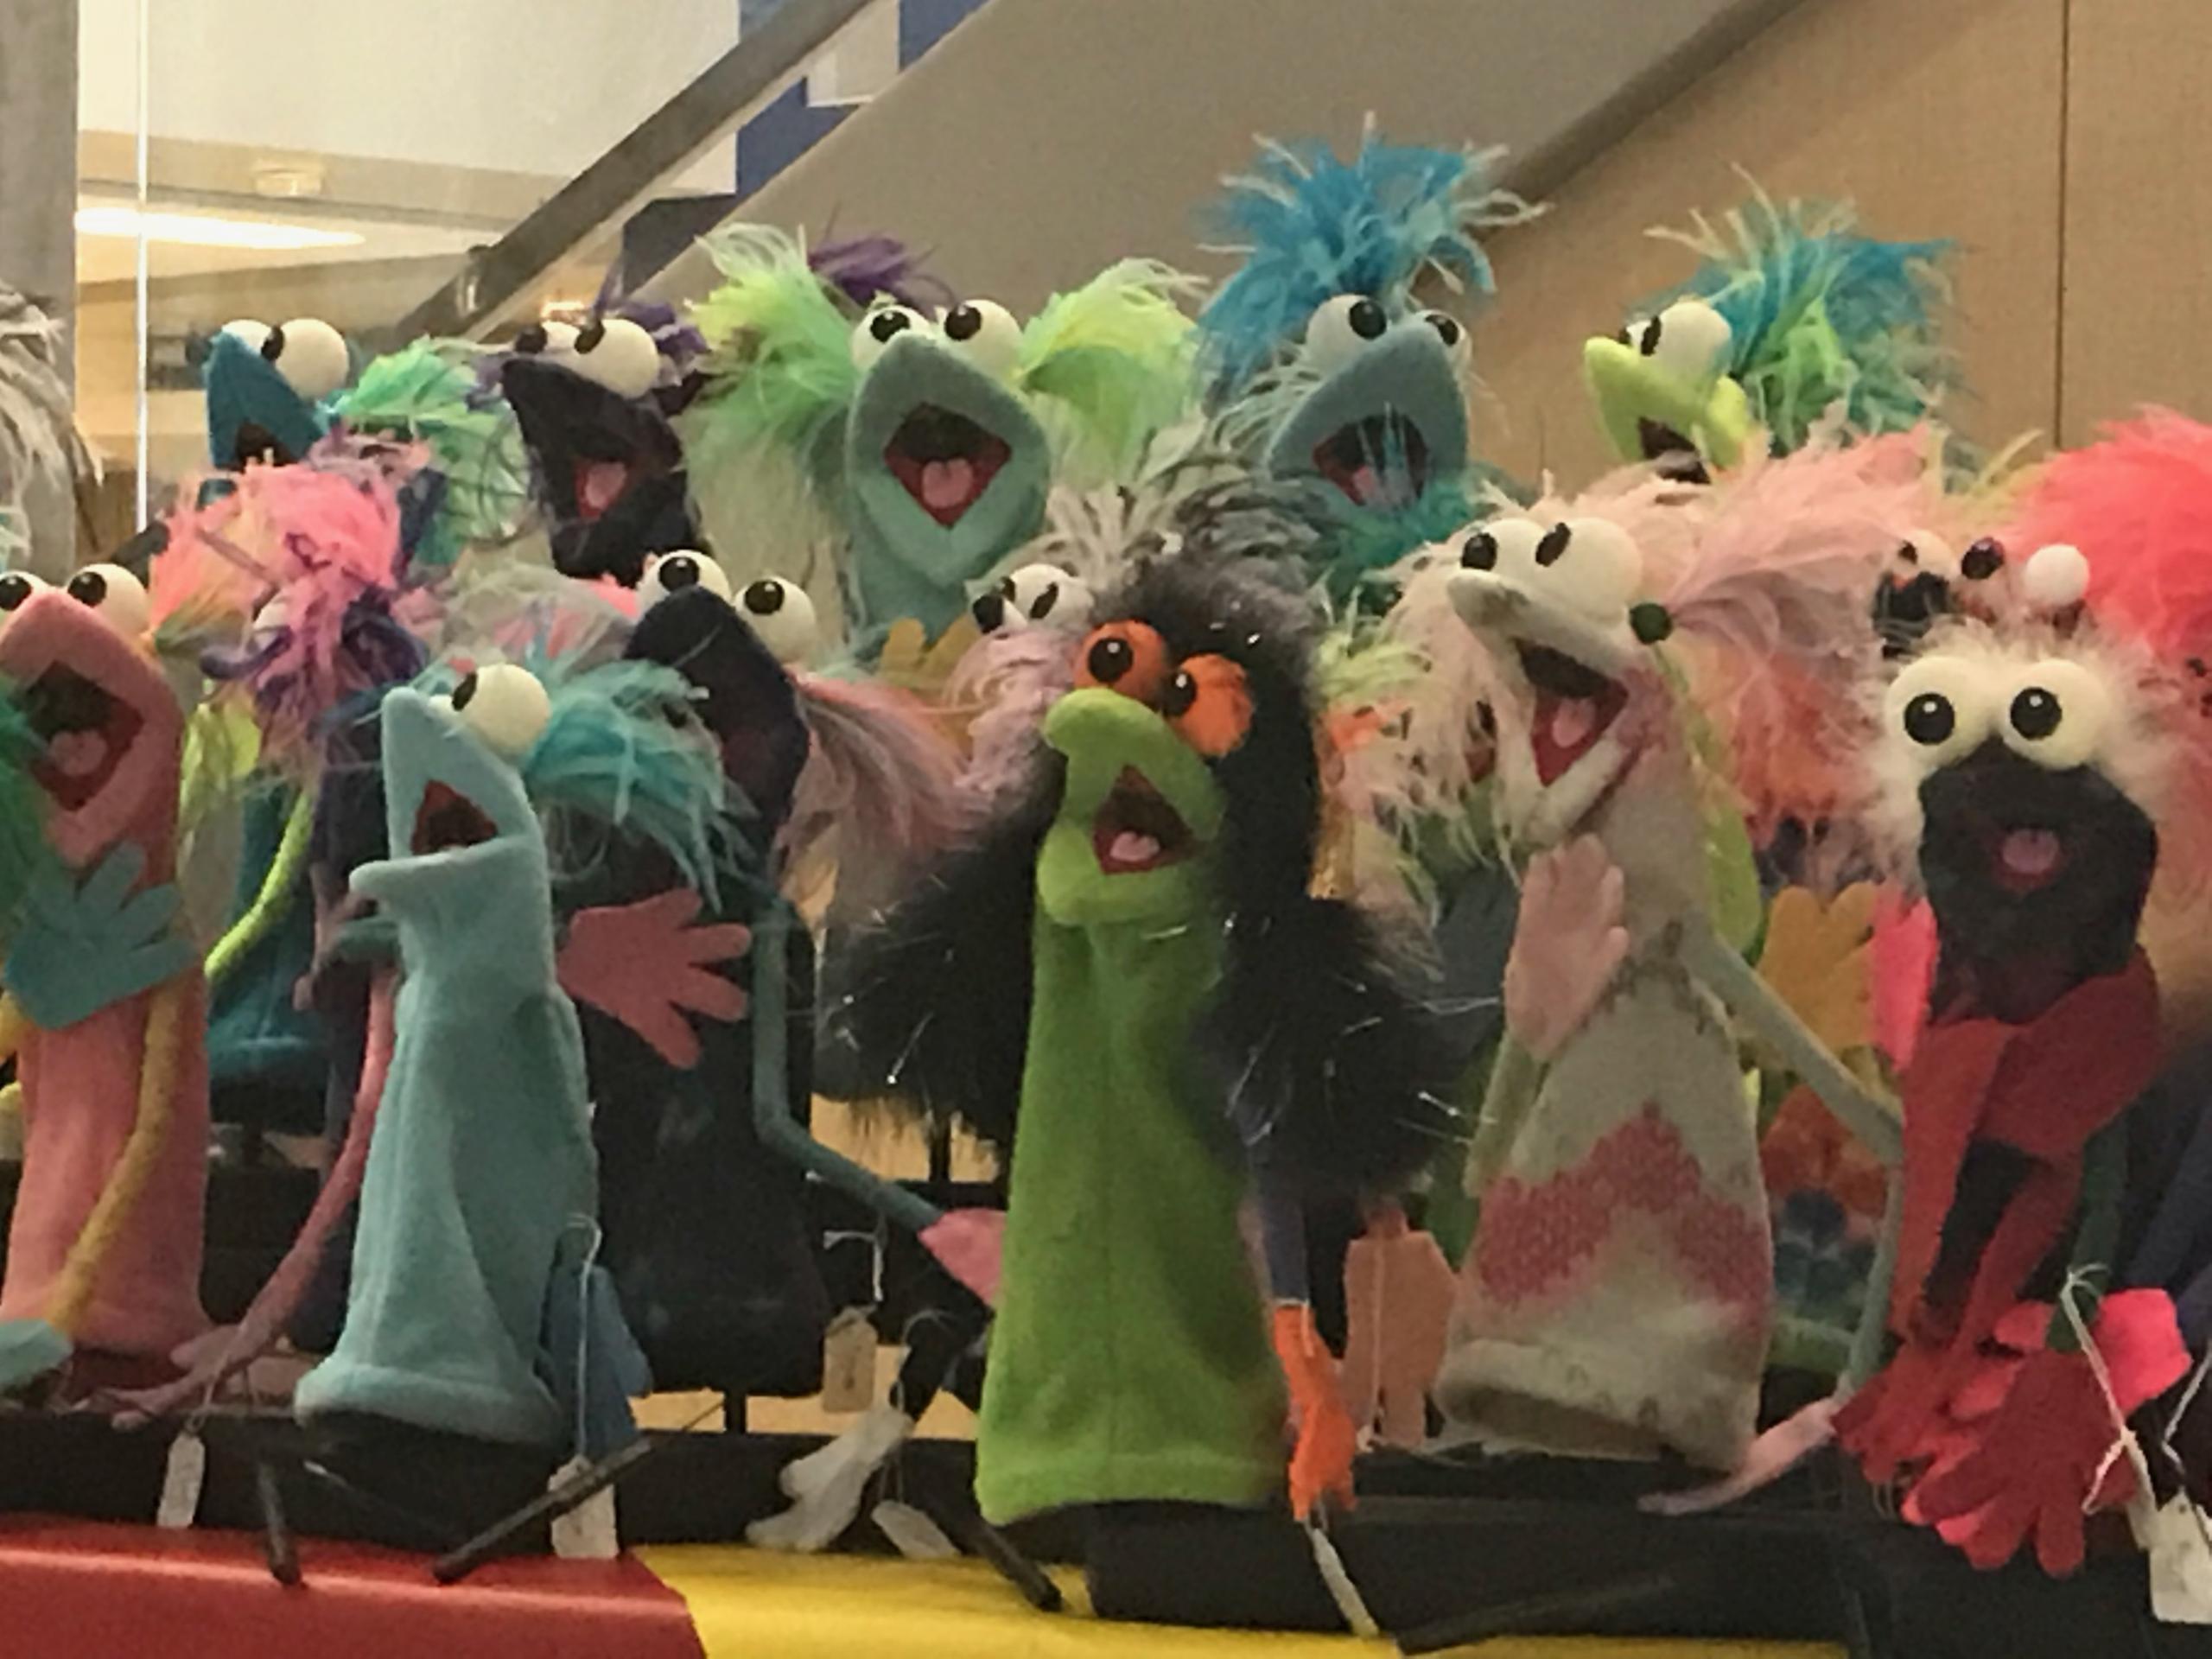 A group of brightly colored puppets.